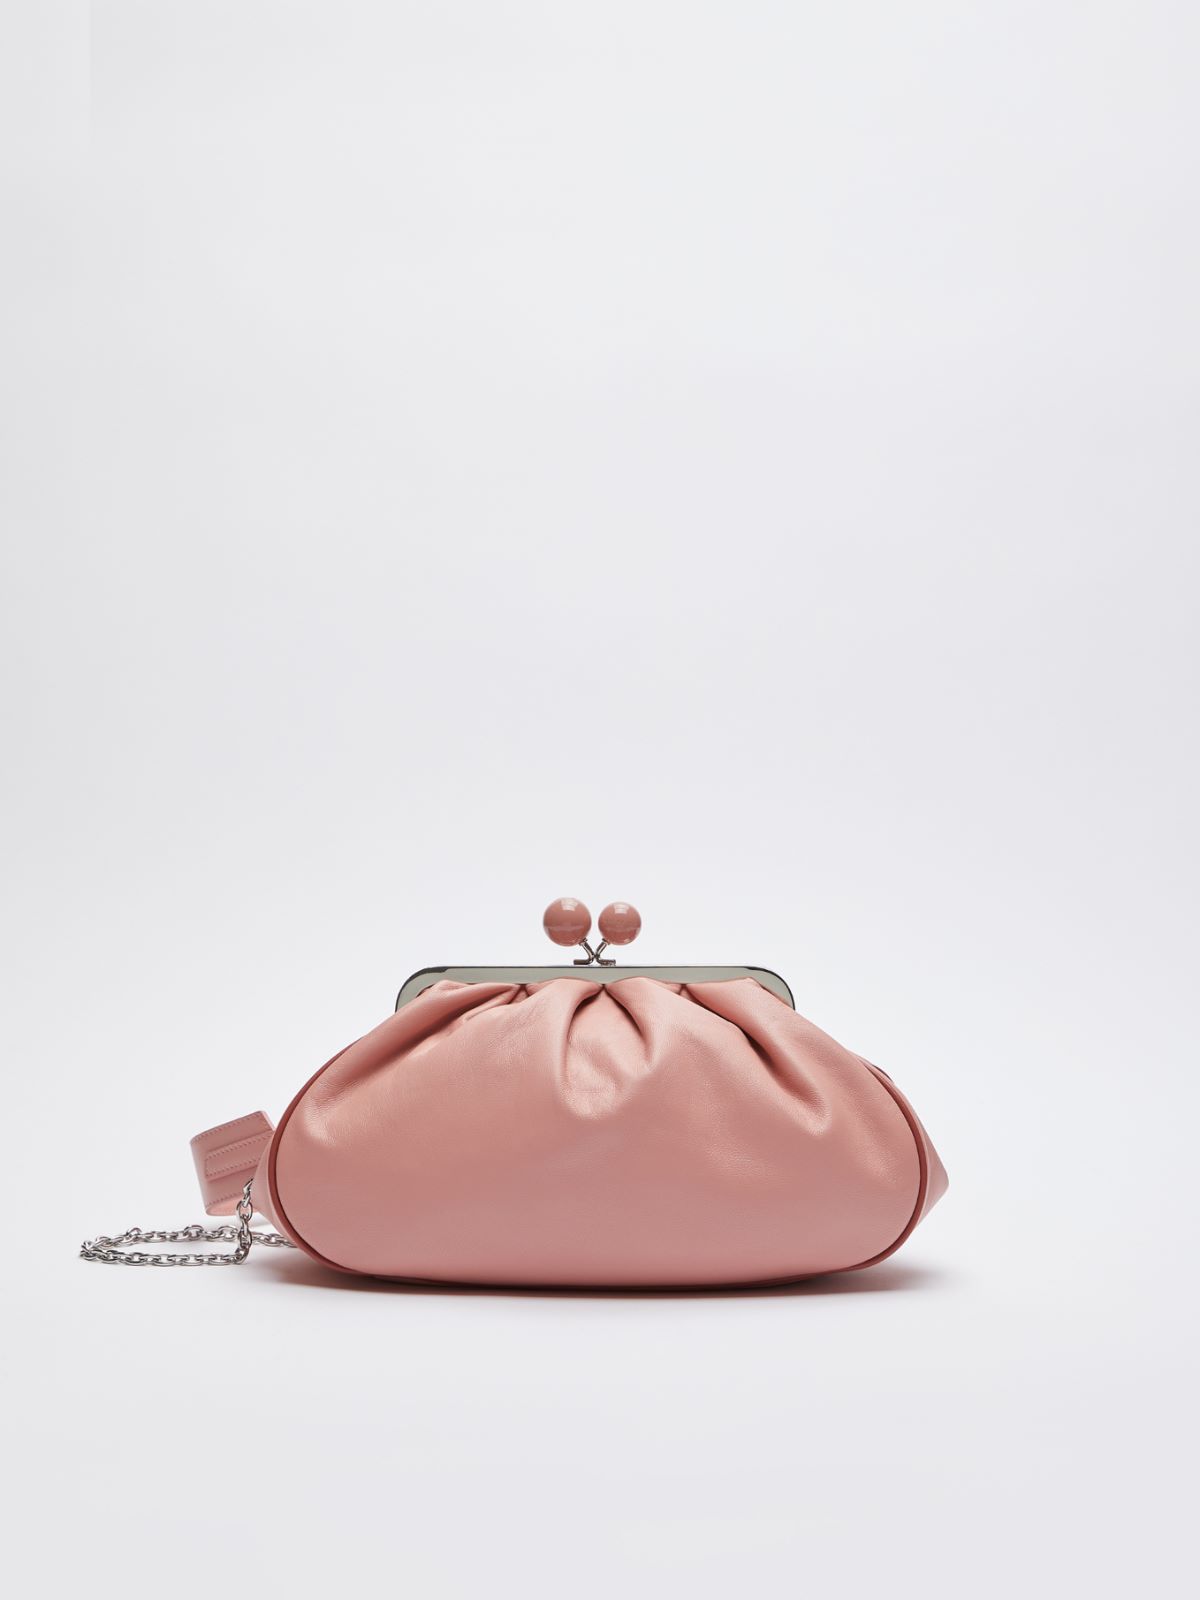 Havoc take Discovery Nappa leather Pasticcino Bag, antique rose | Weekend Max Mara